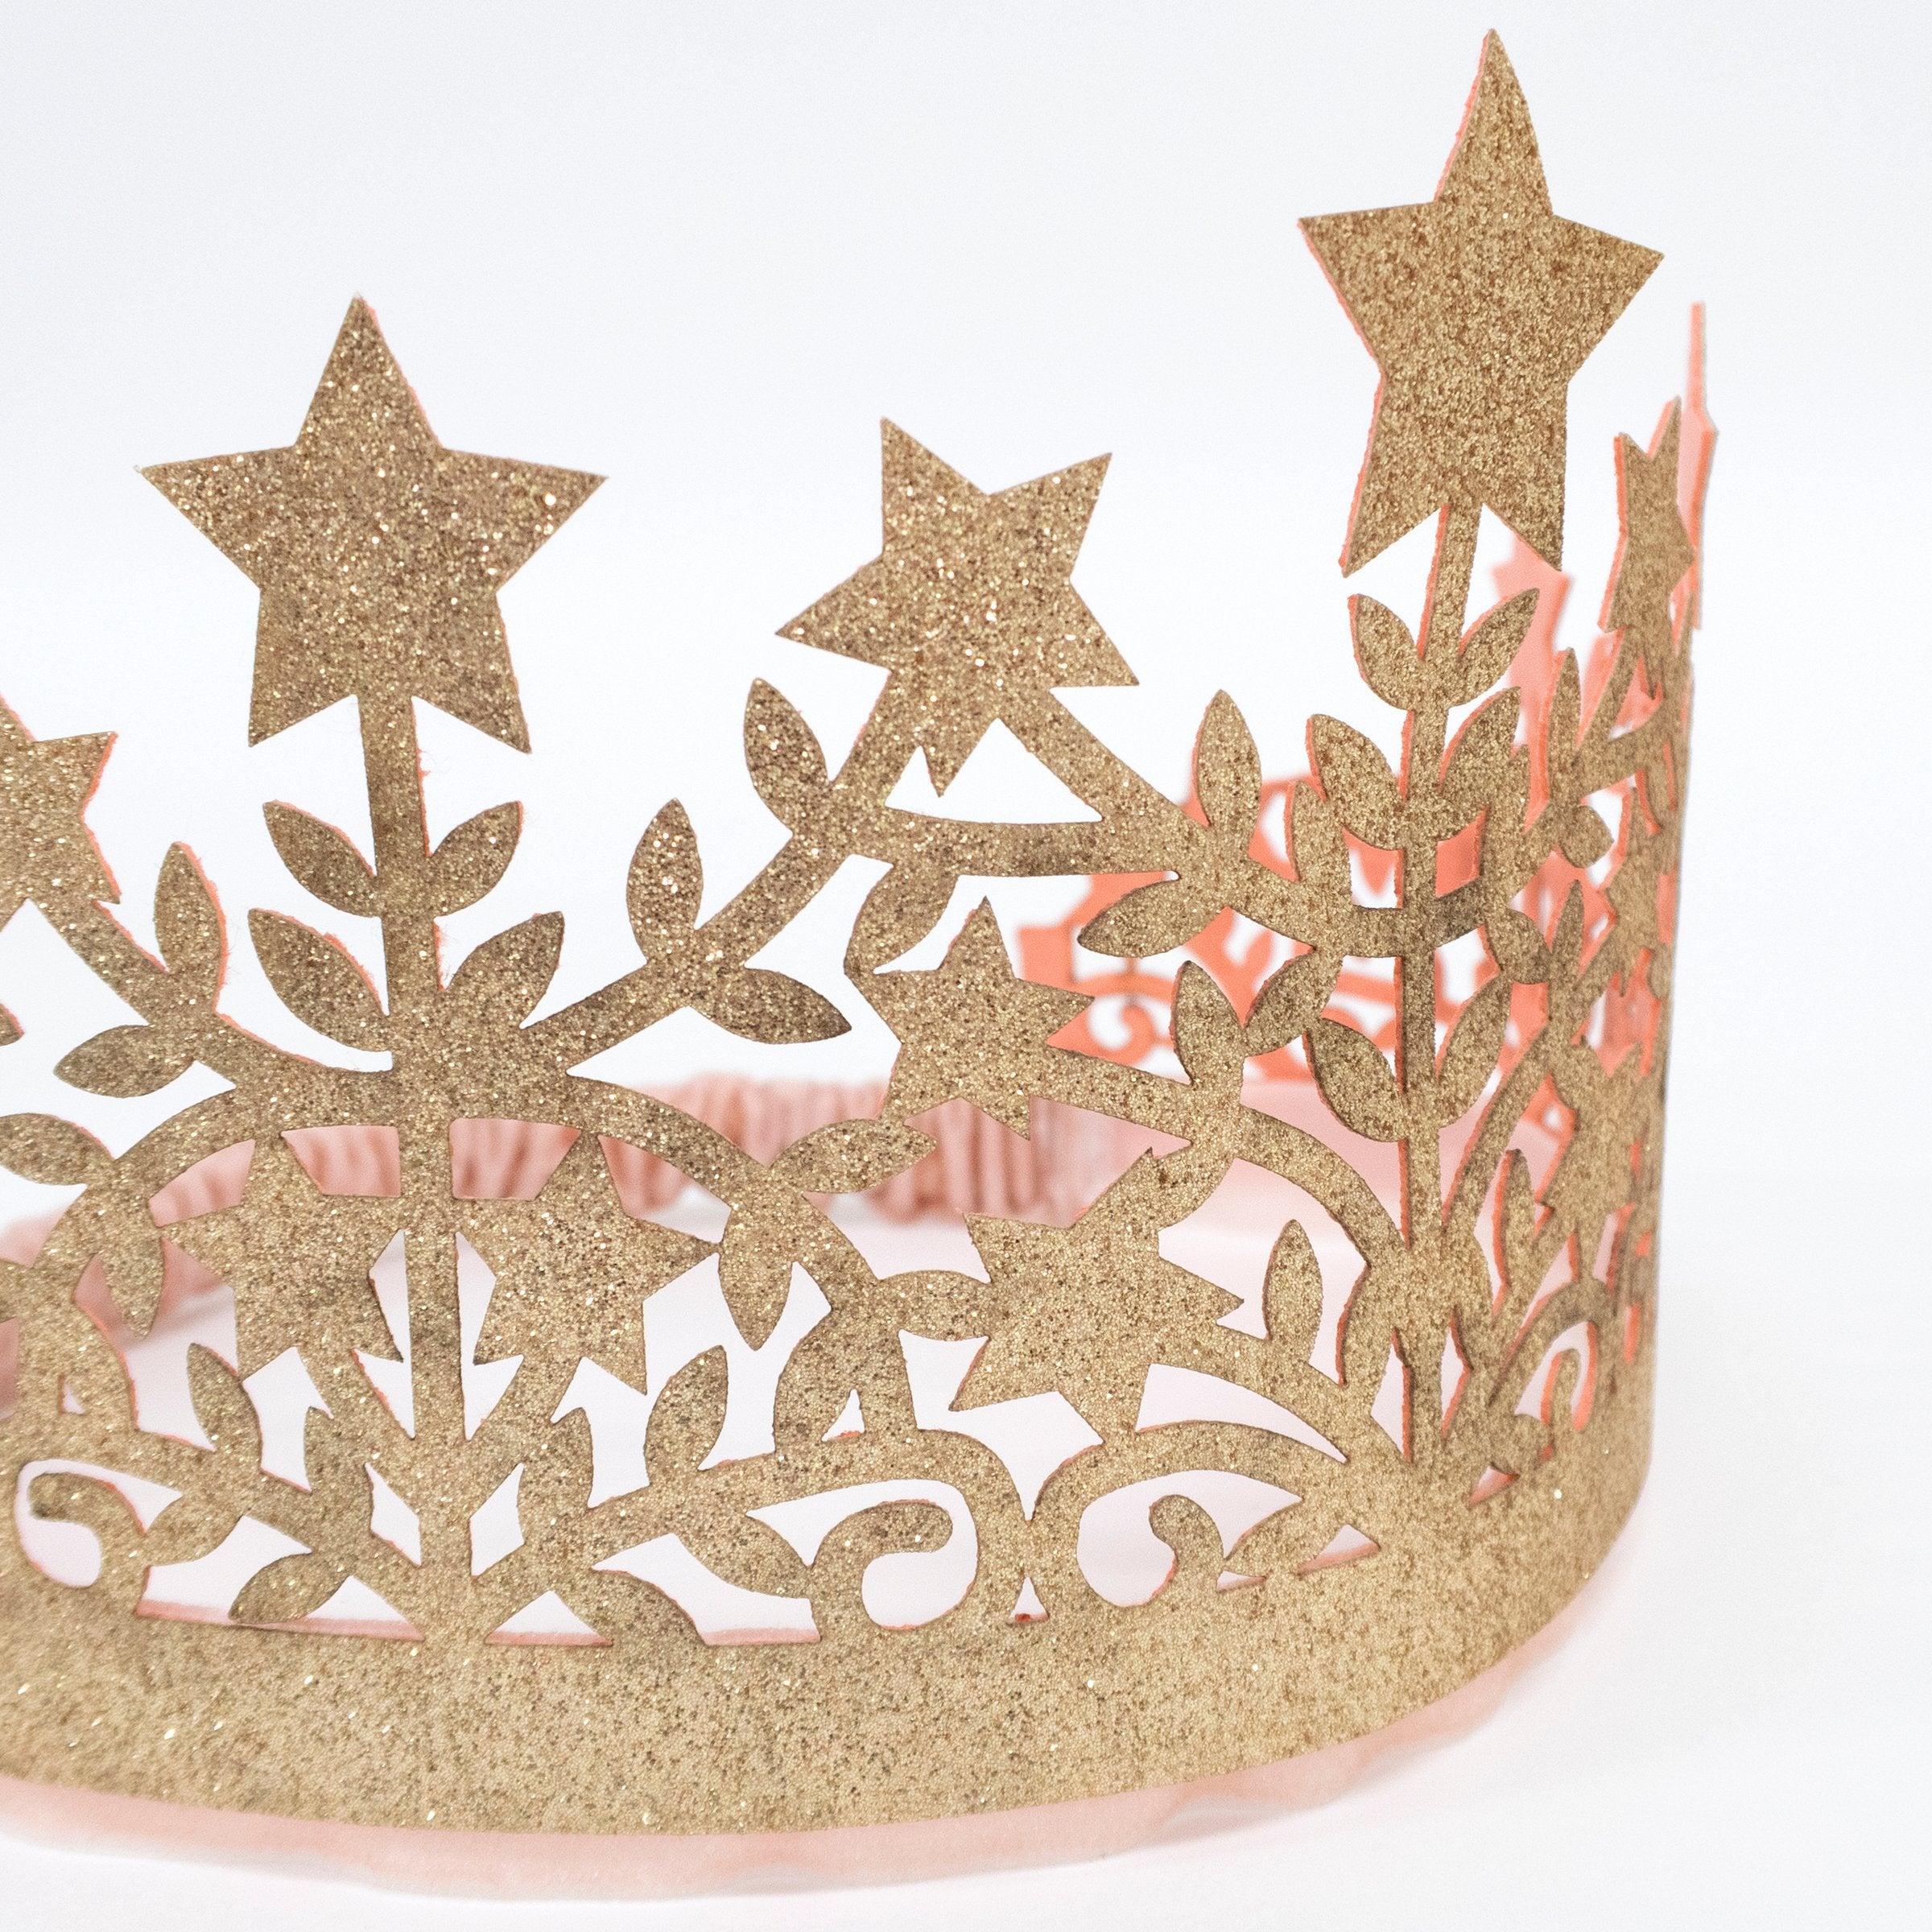 Our gold crown, made with gold glitter fabric, is the perfect kids' crown.